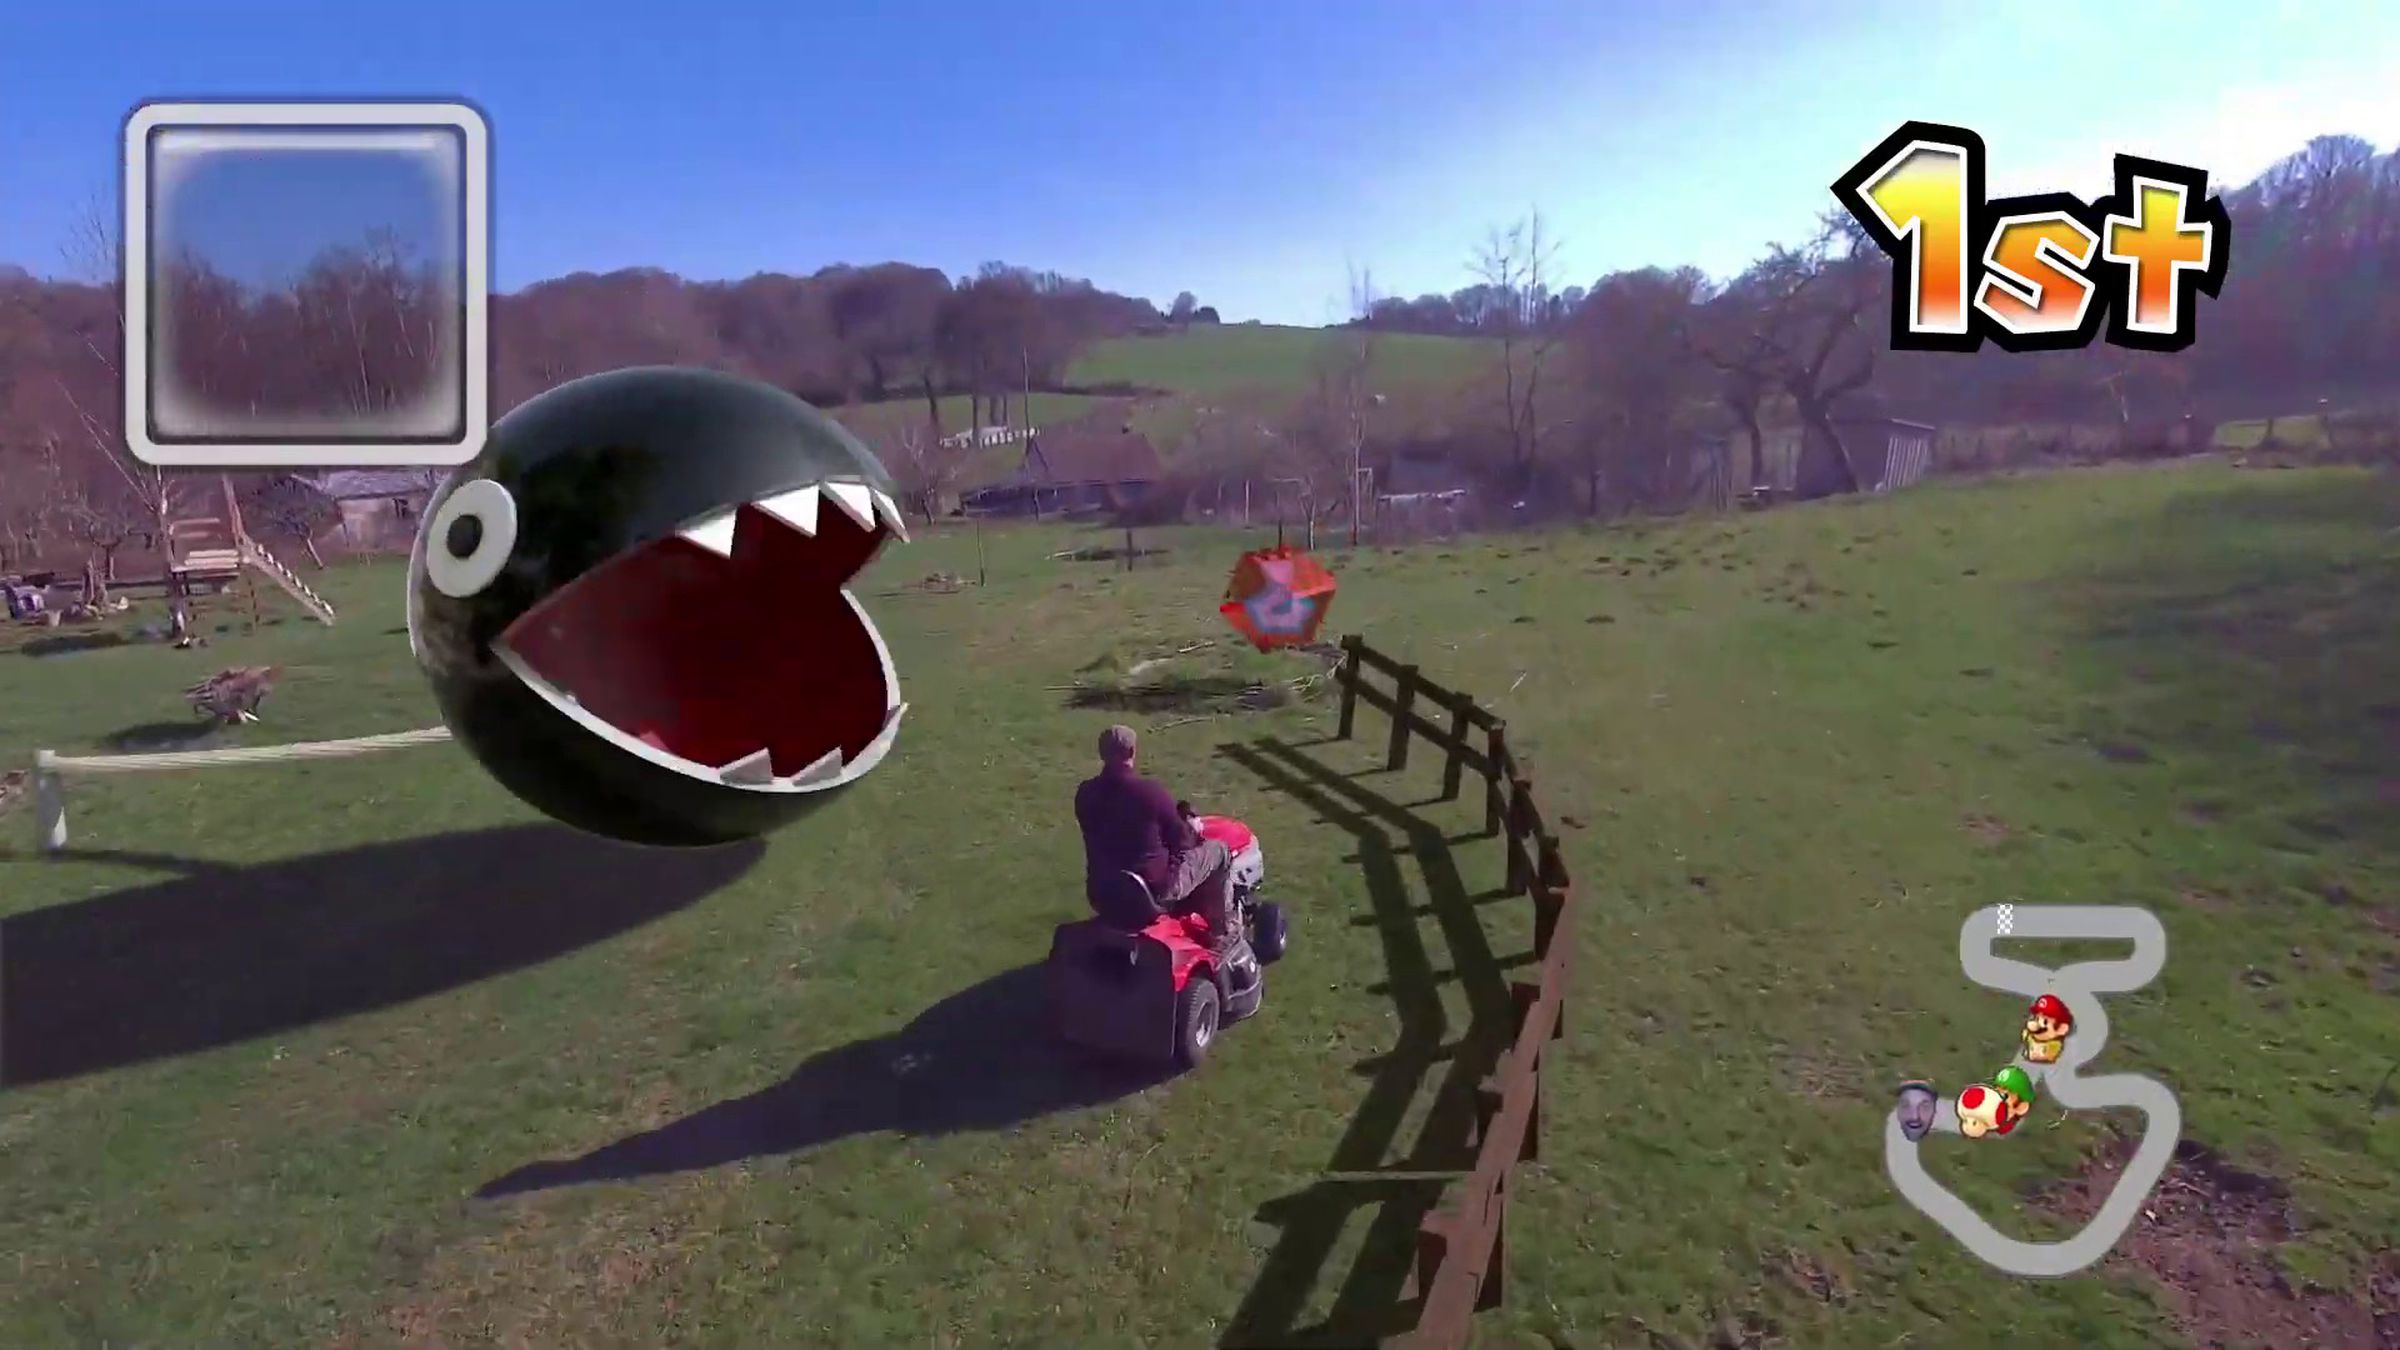 Mario Kart in real life thanks to CG and a self-flying drone: a chain chomp appears to be attacking this riding lawnmower.